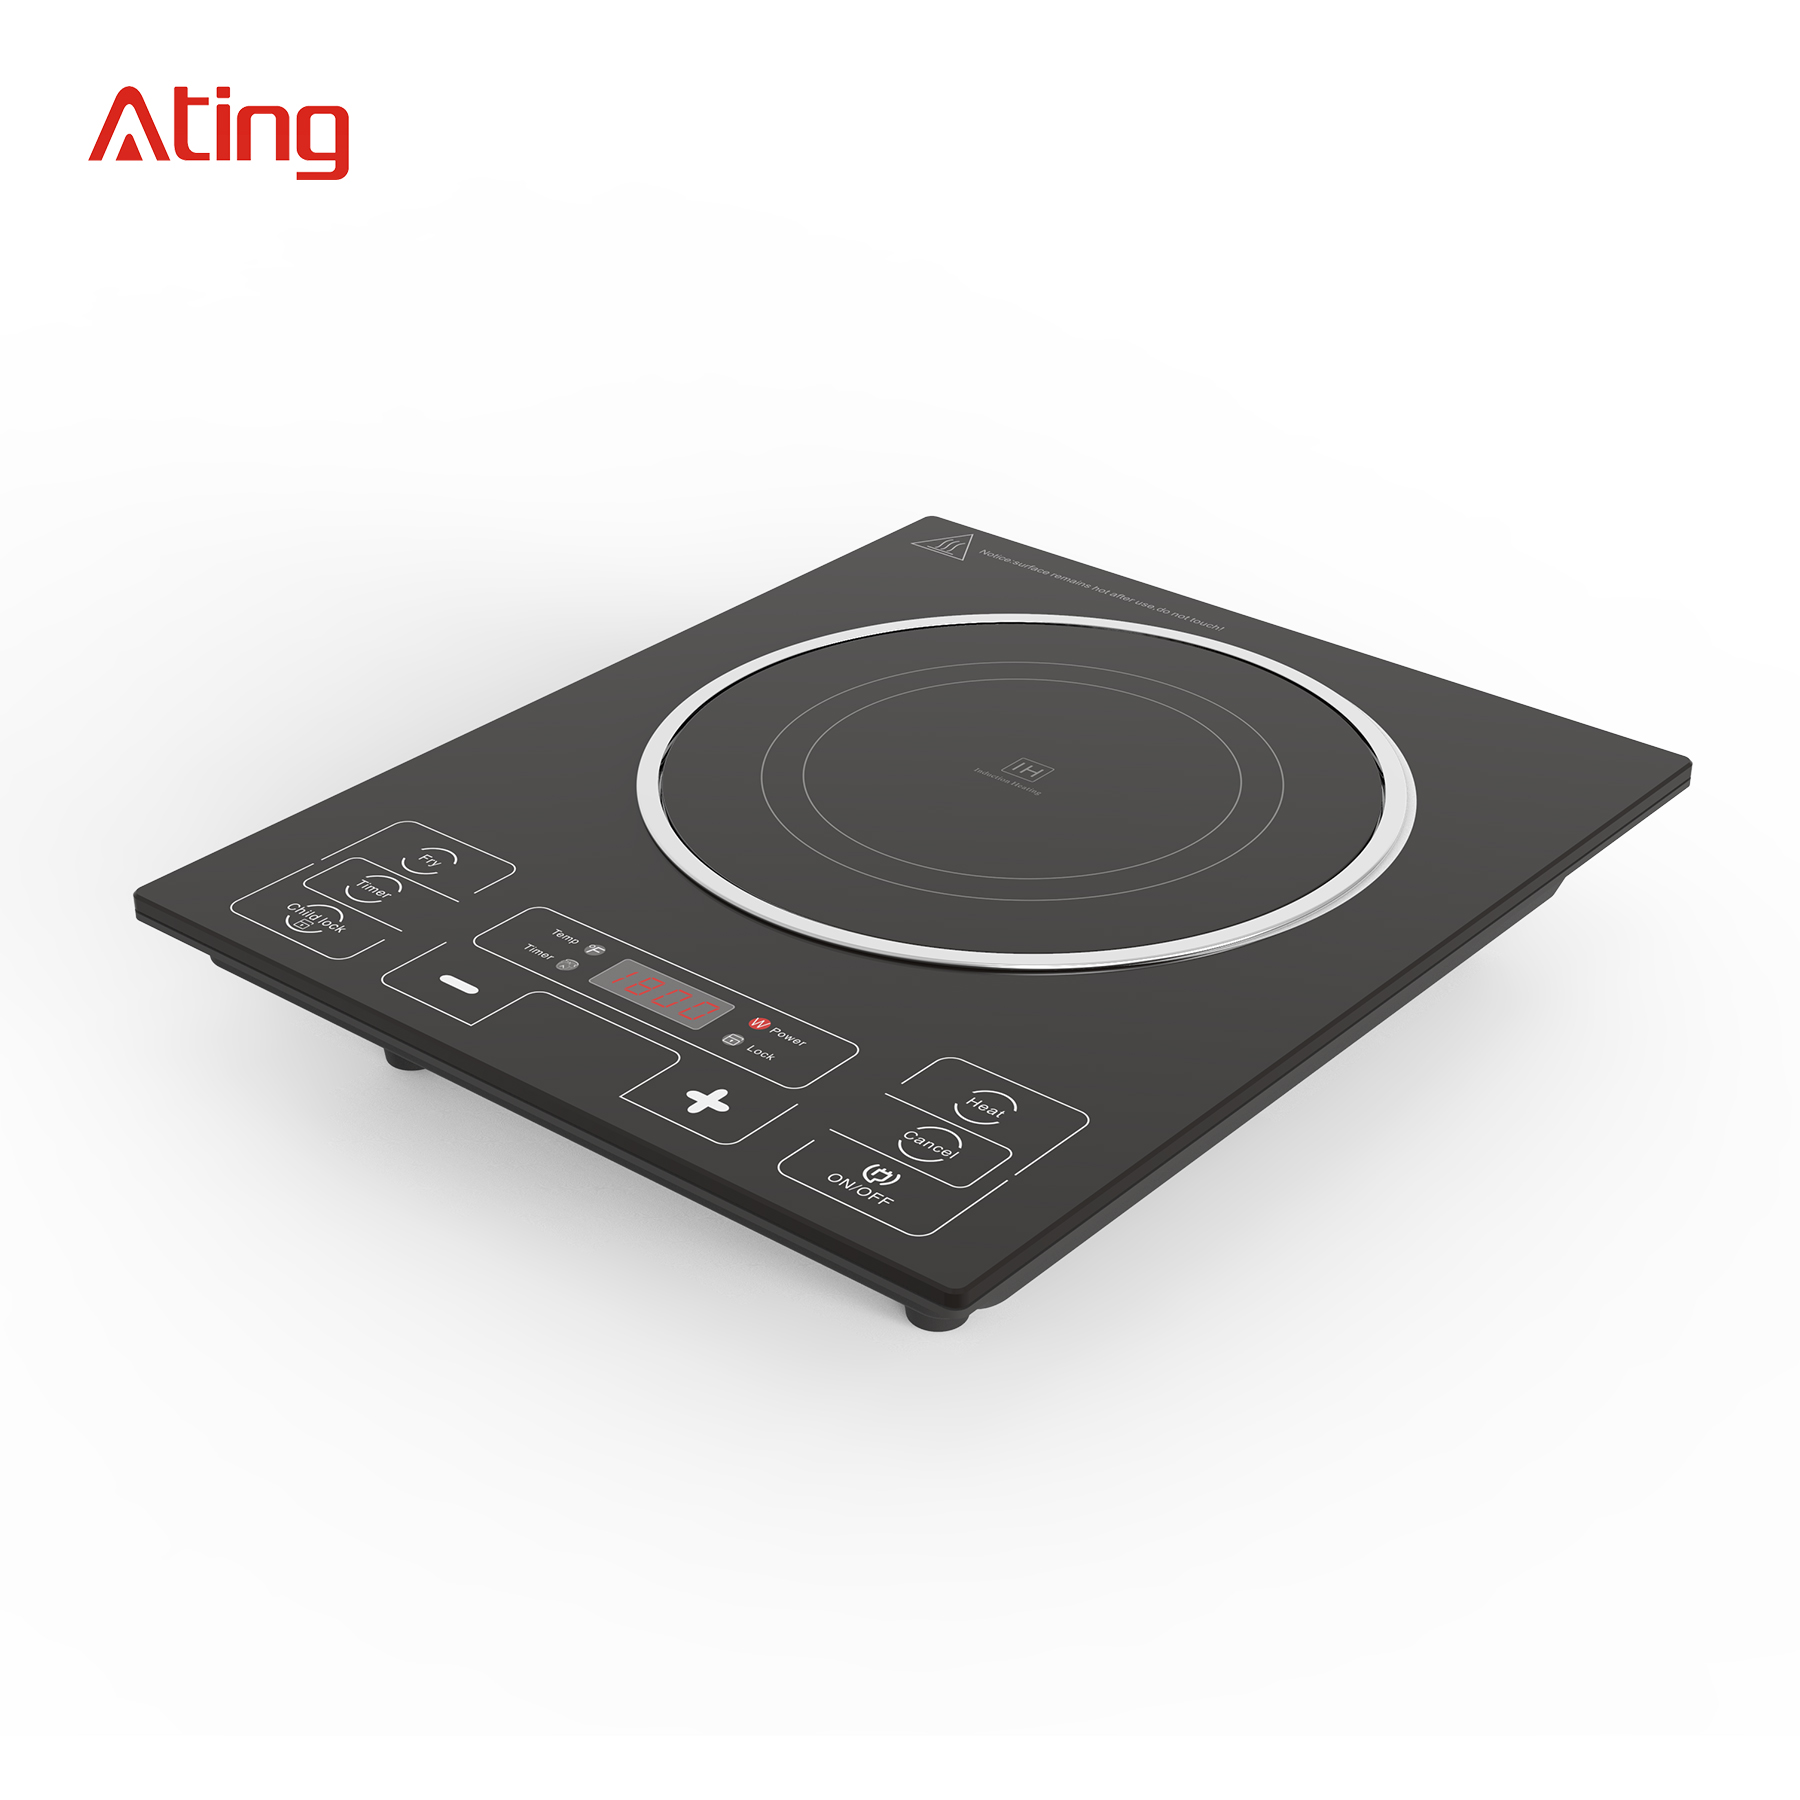 IH-F1800B,1800W/120V touch control portable induction cooktop